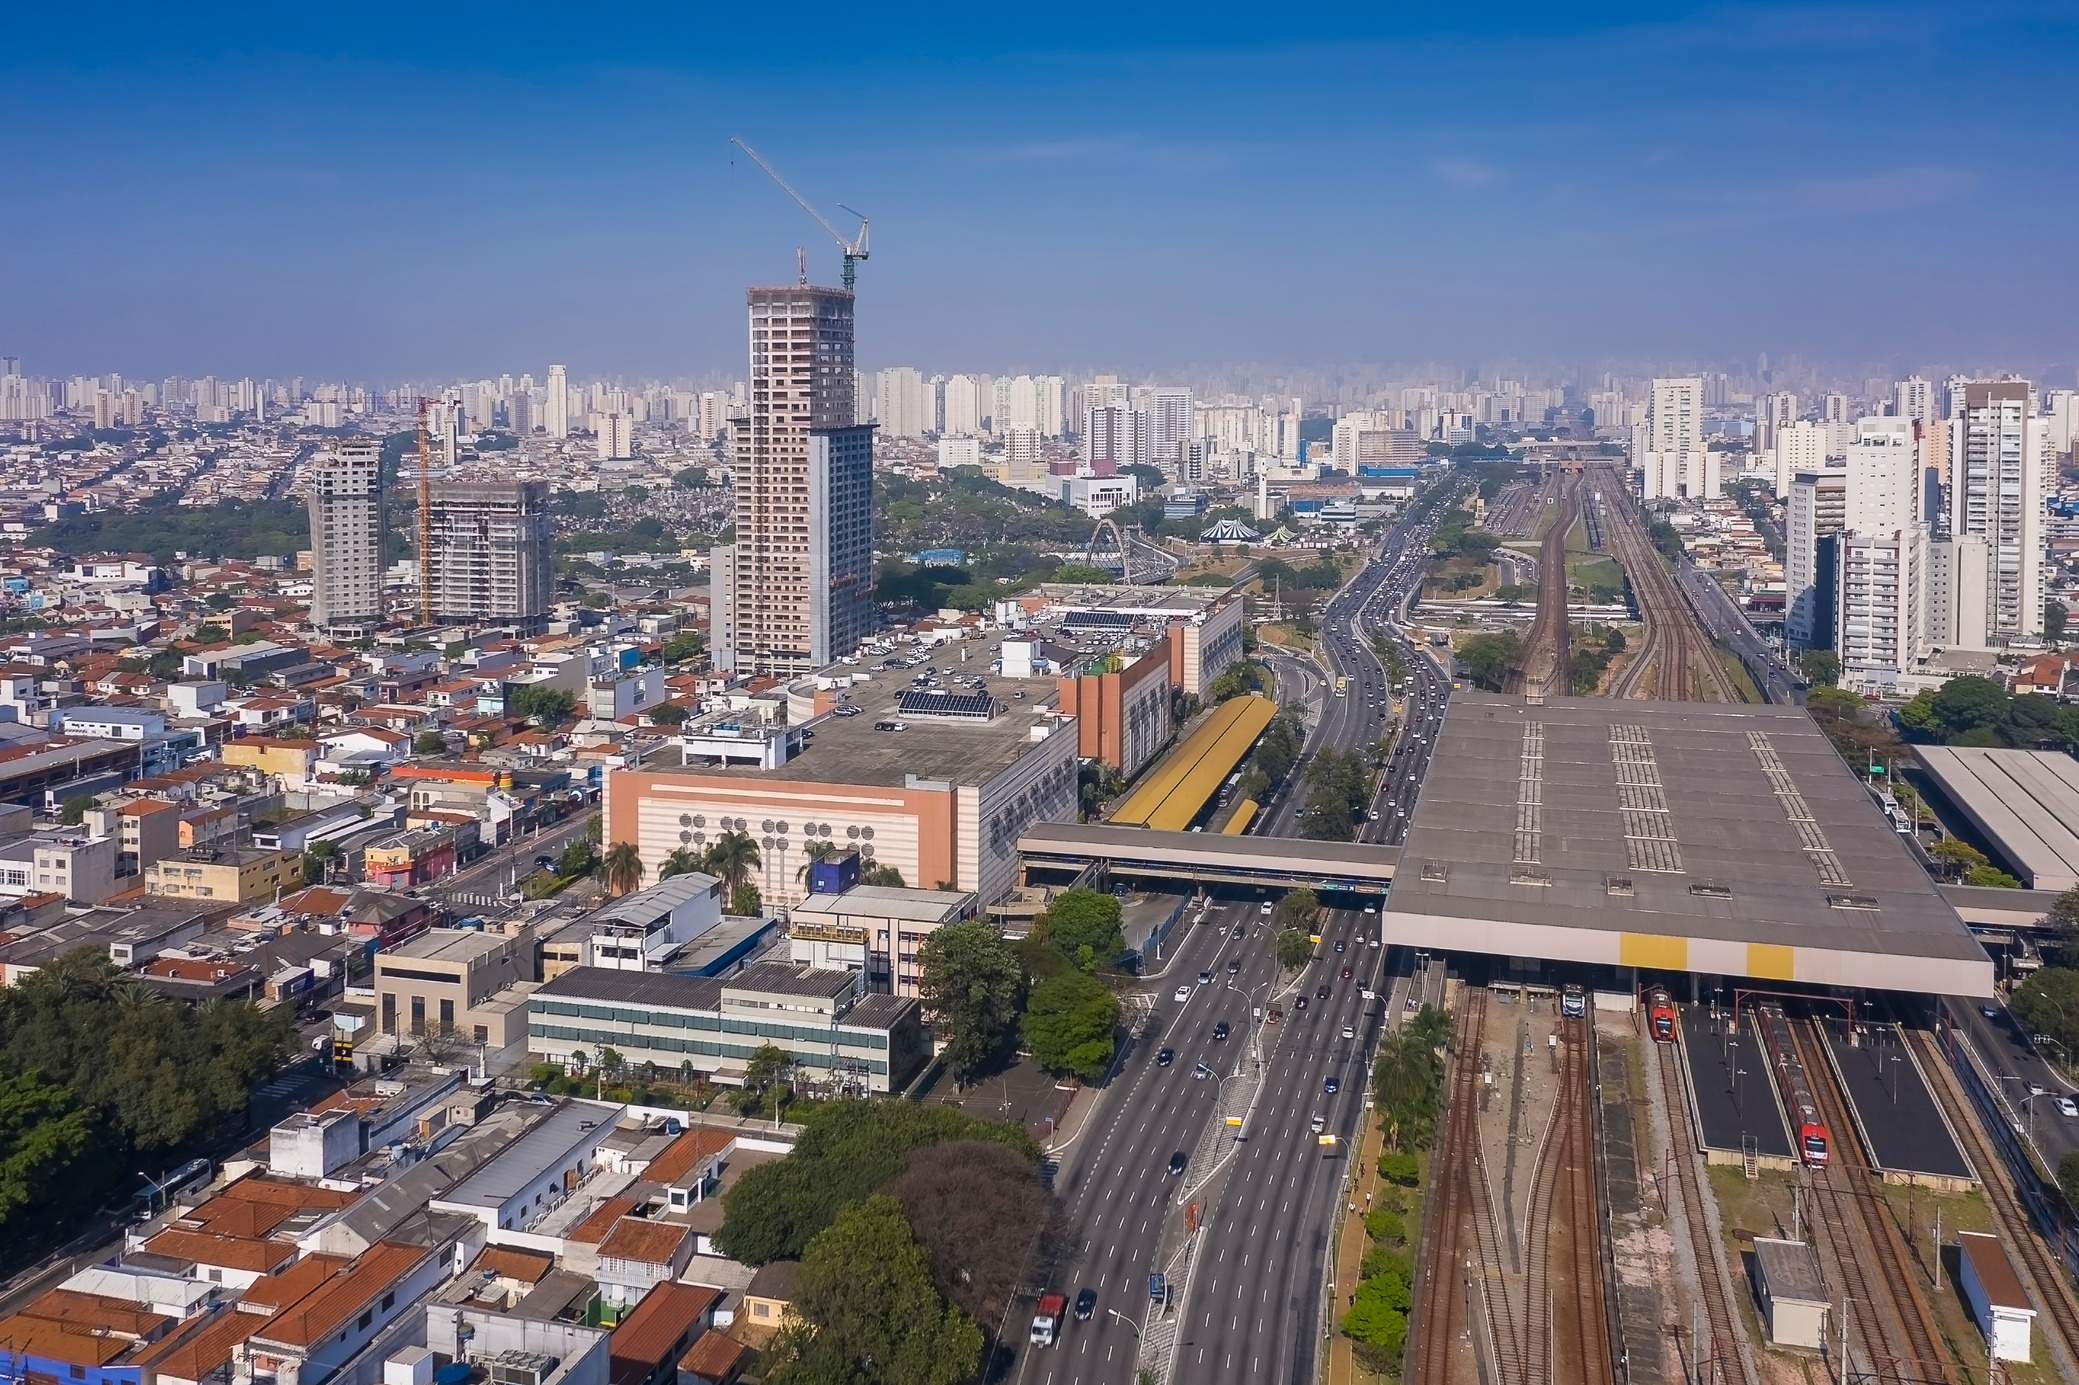 Aerial view of Avenida Radial Leste, Tatuapé train and subway station, in the district of Tatuapé, in the eastern region of the city of Sao Paulo, Brazil